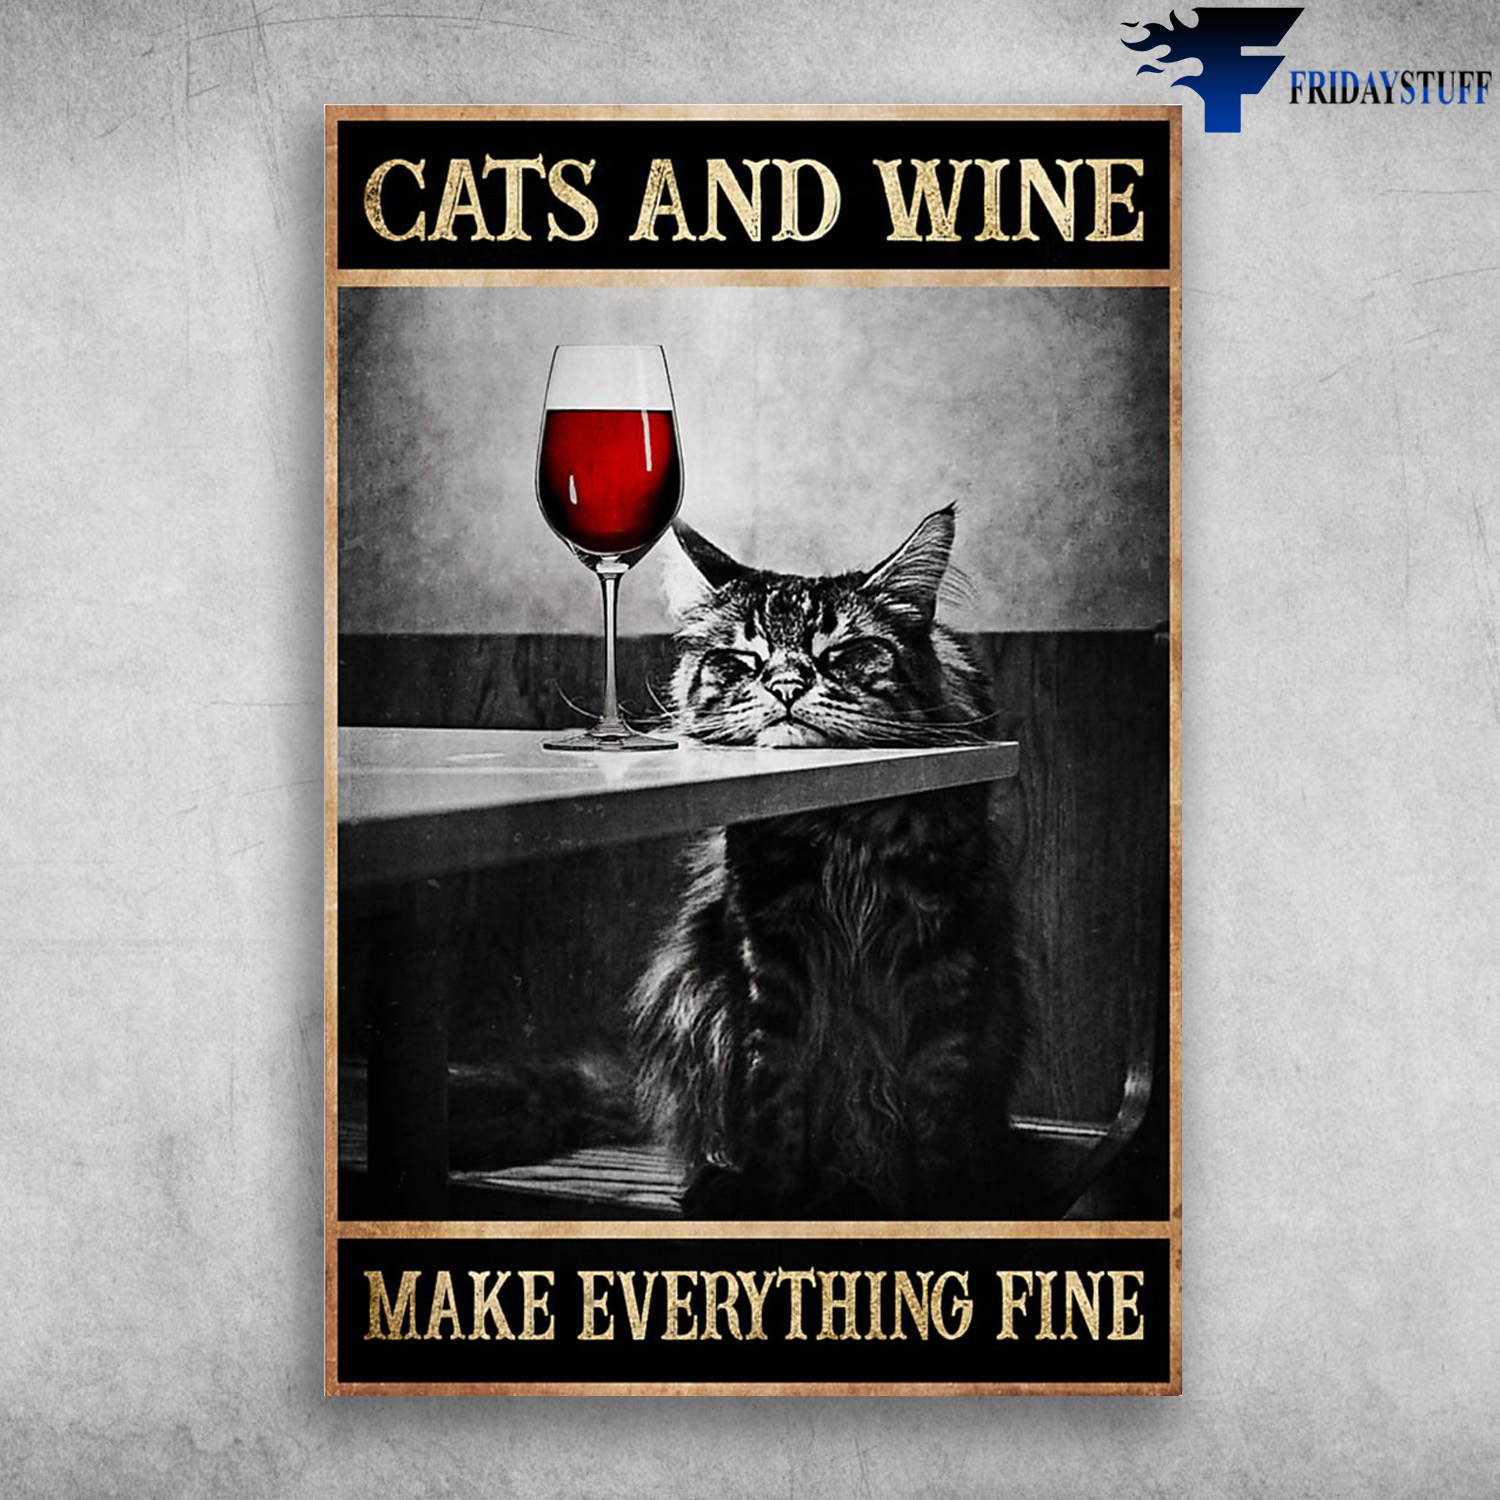 Maine Coon Cat - Cats And Wine, Make Everything Fine